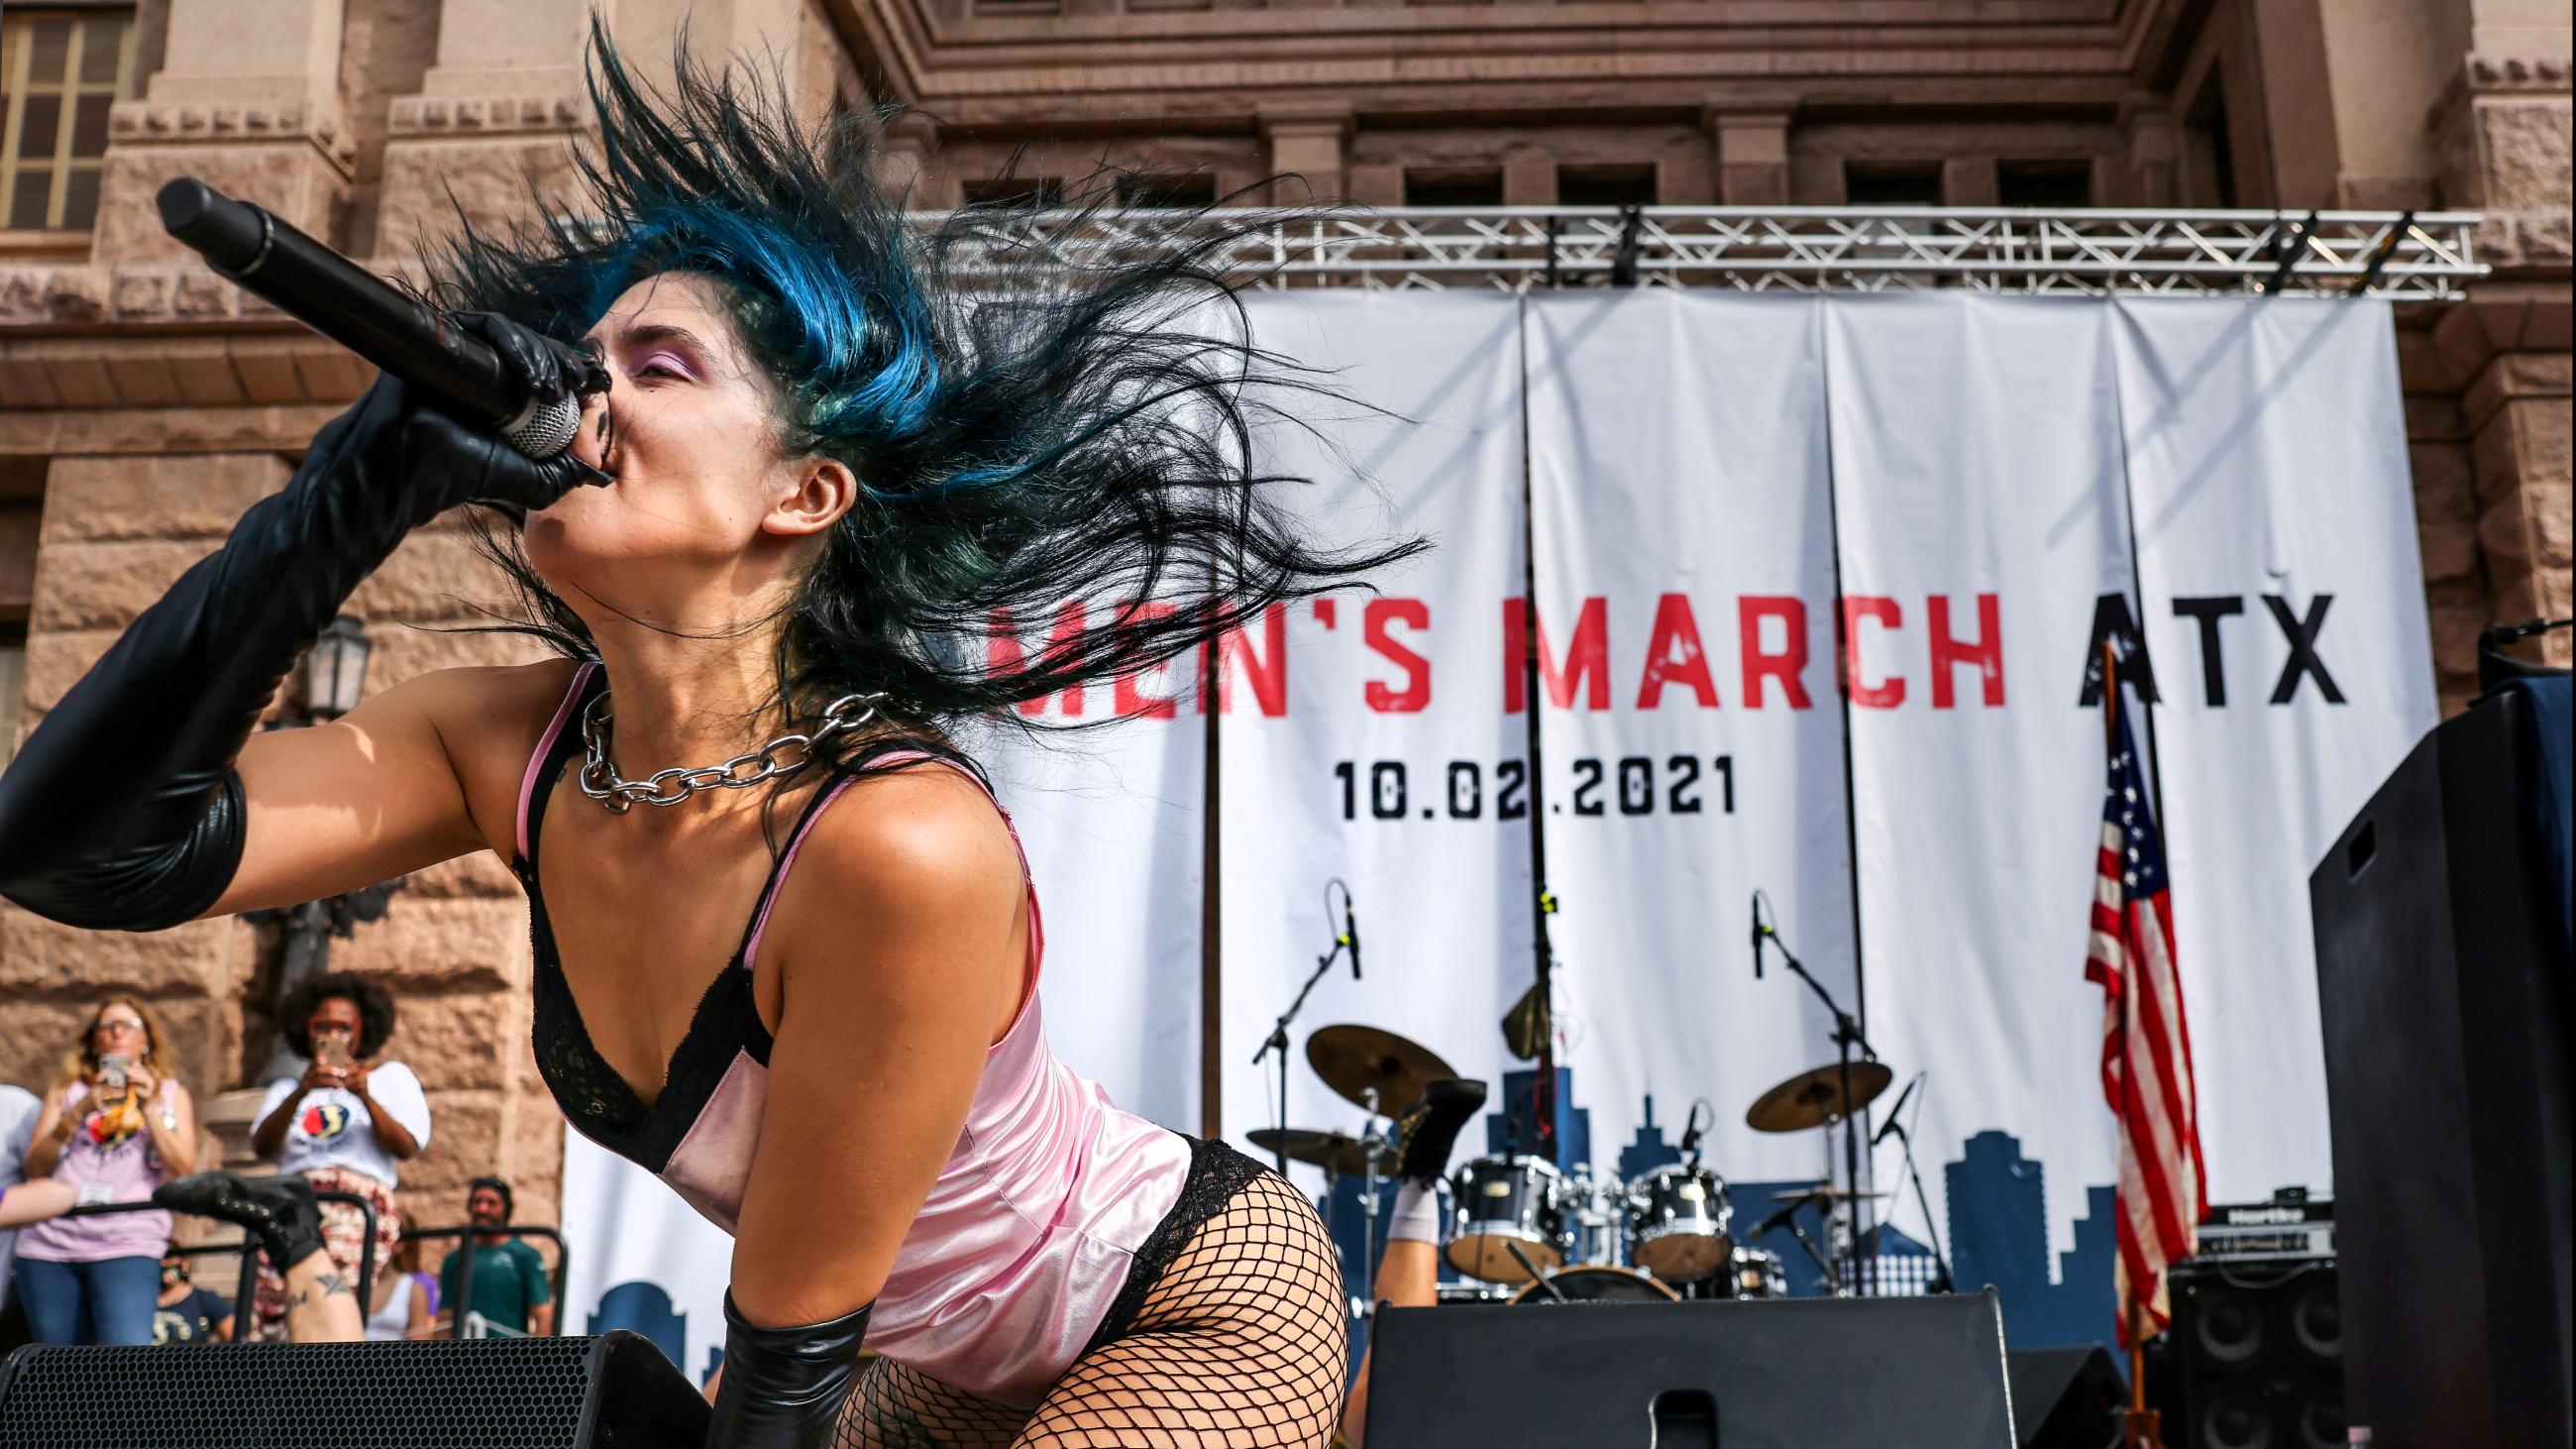 A member of Pussy Riot performs in the nationwide Women's March, held after Texas rolled out a near-total ban on abortion procedures and access to abortion-inducing medications, in Austin, Texas